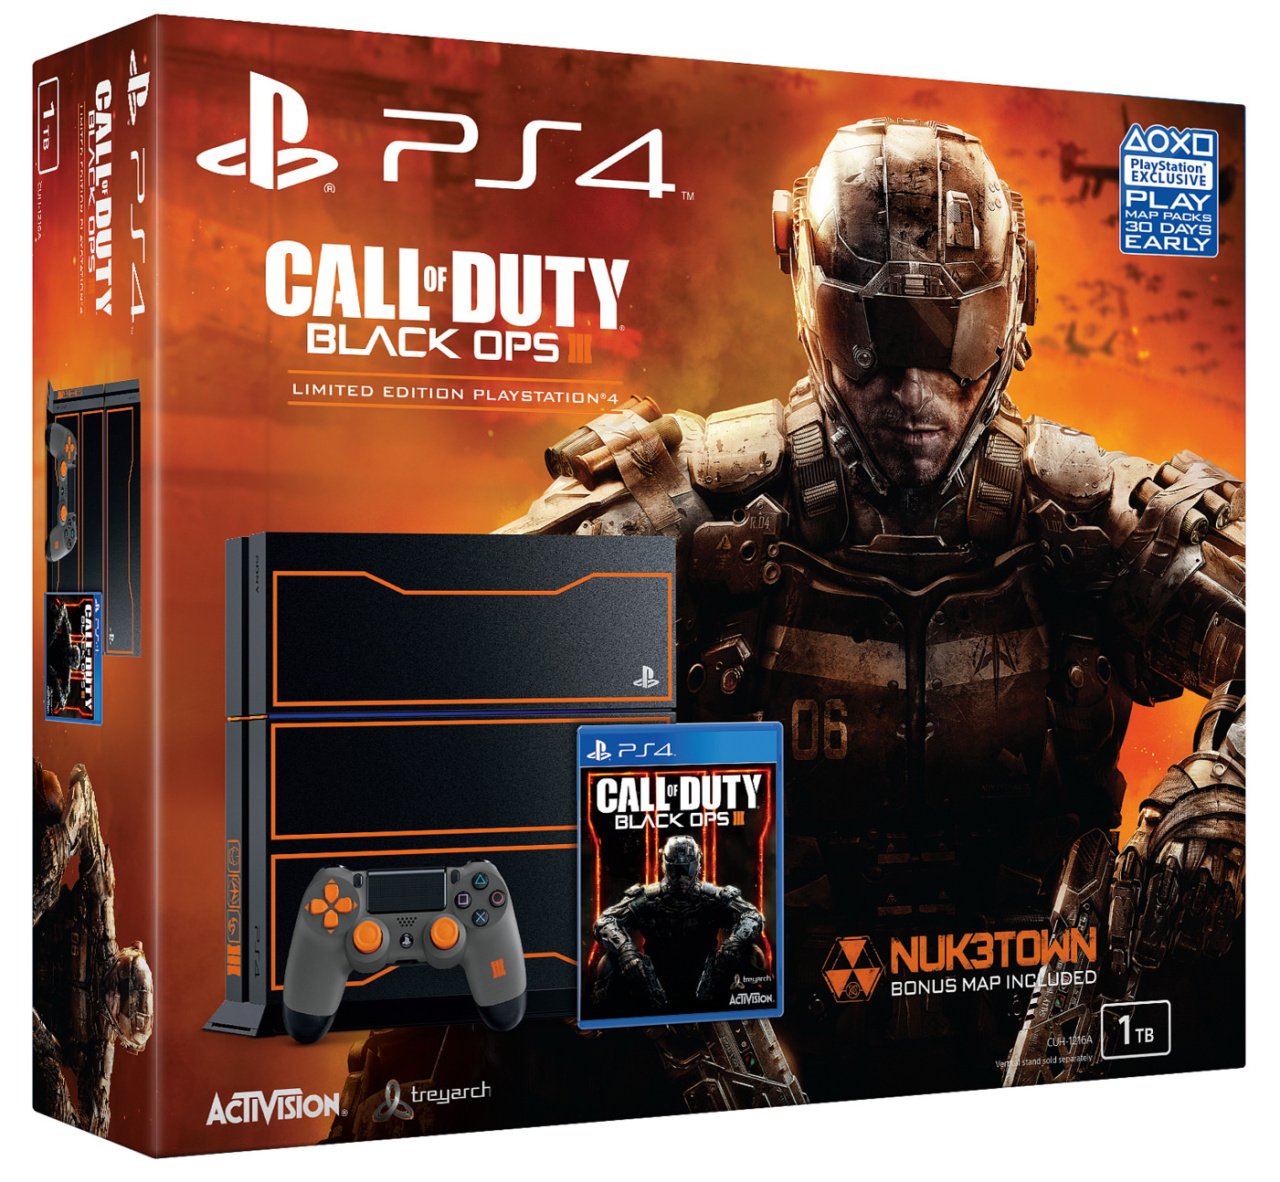 Nonsens læbe hellig Here's Your Custom Call of Duty: Black Ops 3 PS4 | Push Square